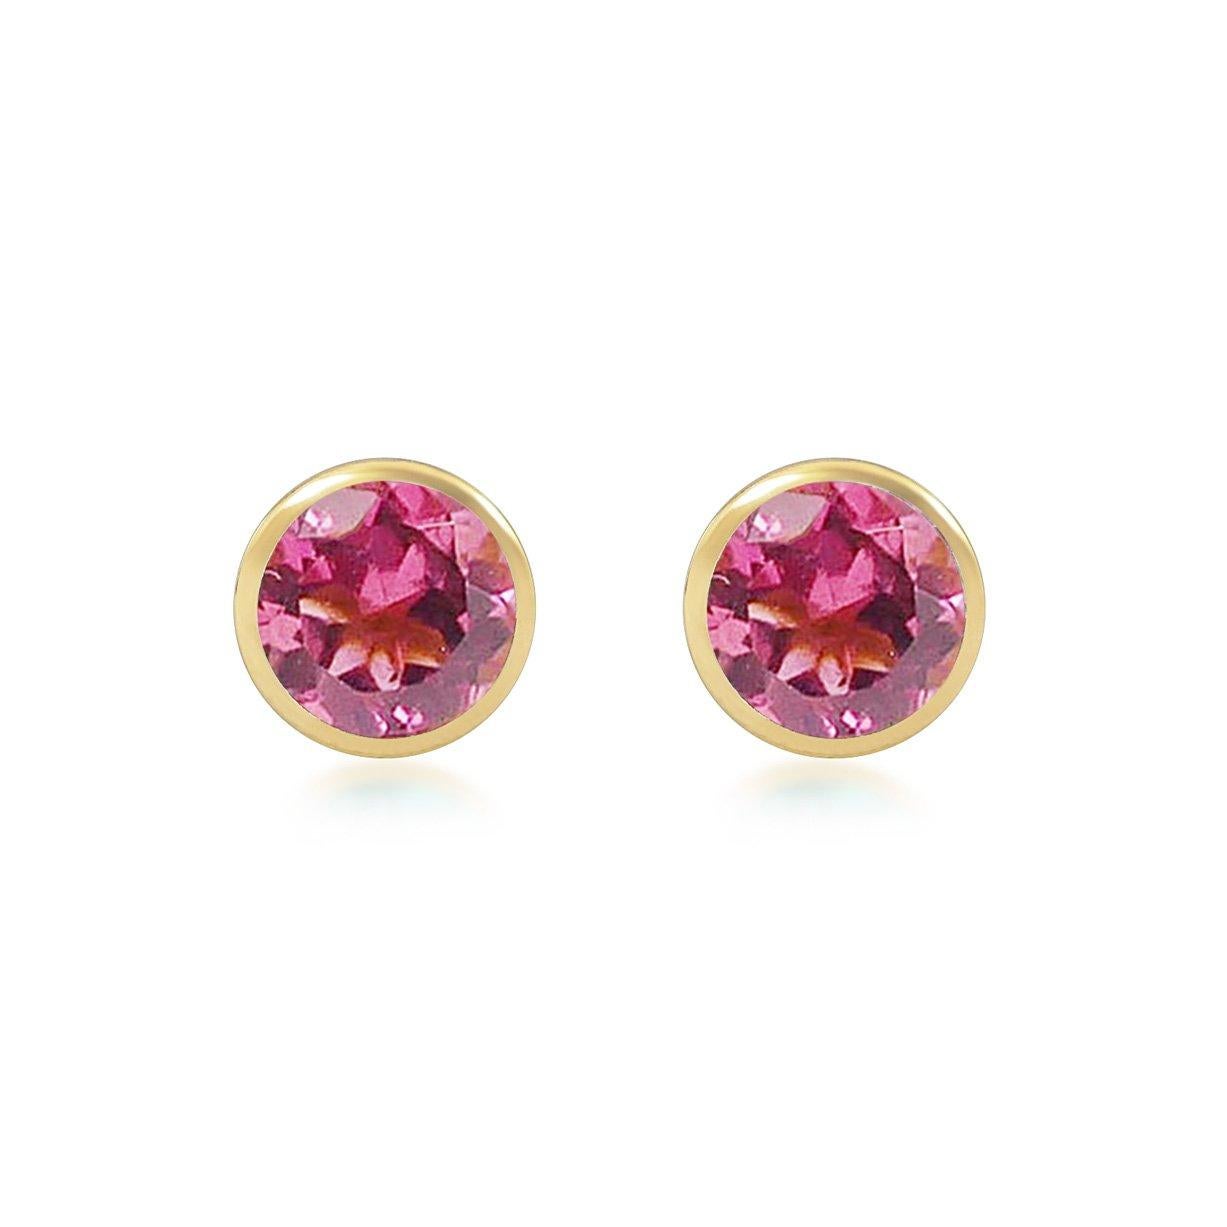 Contemporary Handcrafted 2.60 Carats Pink Tourmaline 18 Karat Yellow Gold Stud Earrings For Sale